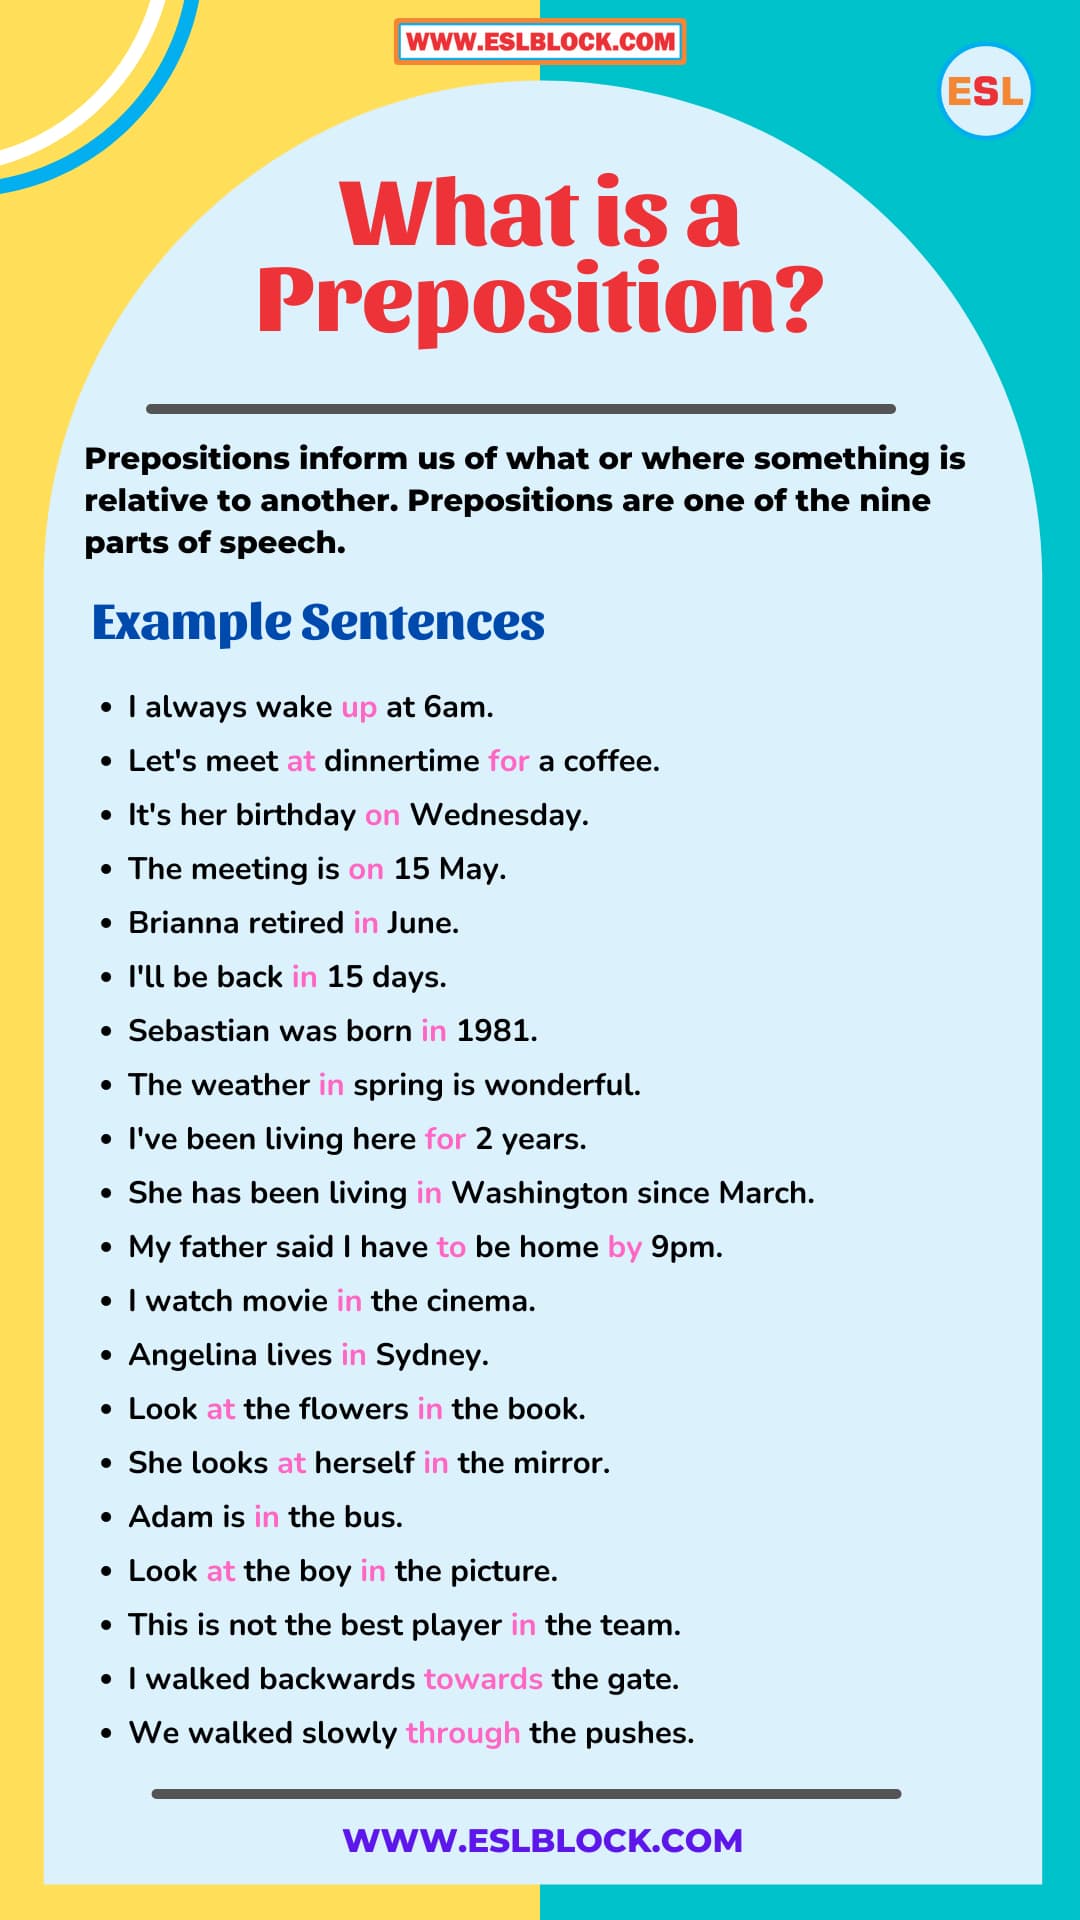 Common Errors with Prepositions, English Grammar, How to Use Prepositions, Parts of Speech, Parts of Speech in English Grammar, Preposition Definition, Preposition Examples, Preposition Rules, Prepositions of Movement, Prepositions of Place, Prepositions of Time and Place, Prepositions Used in Sentences, The Importance of Prepositions, Types of Prepositions, What is a Preposition